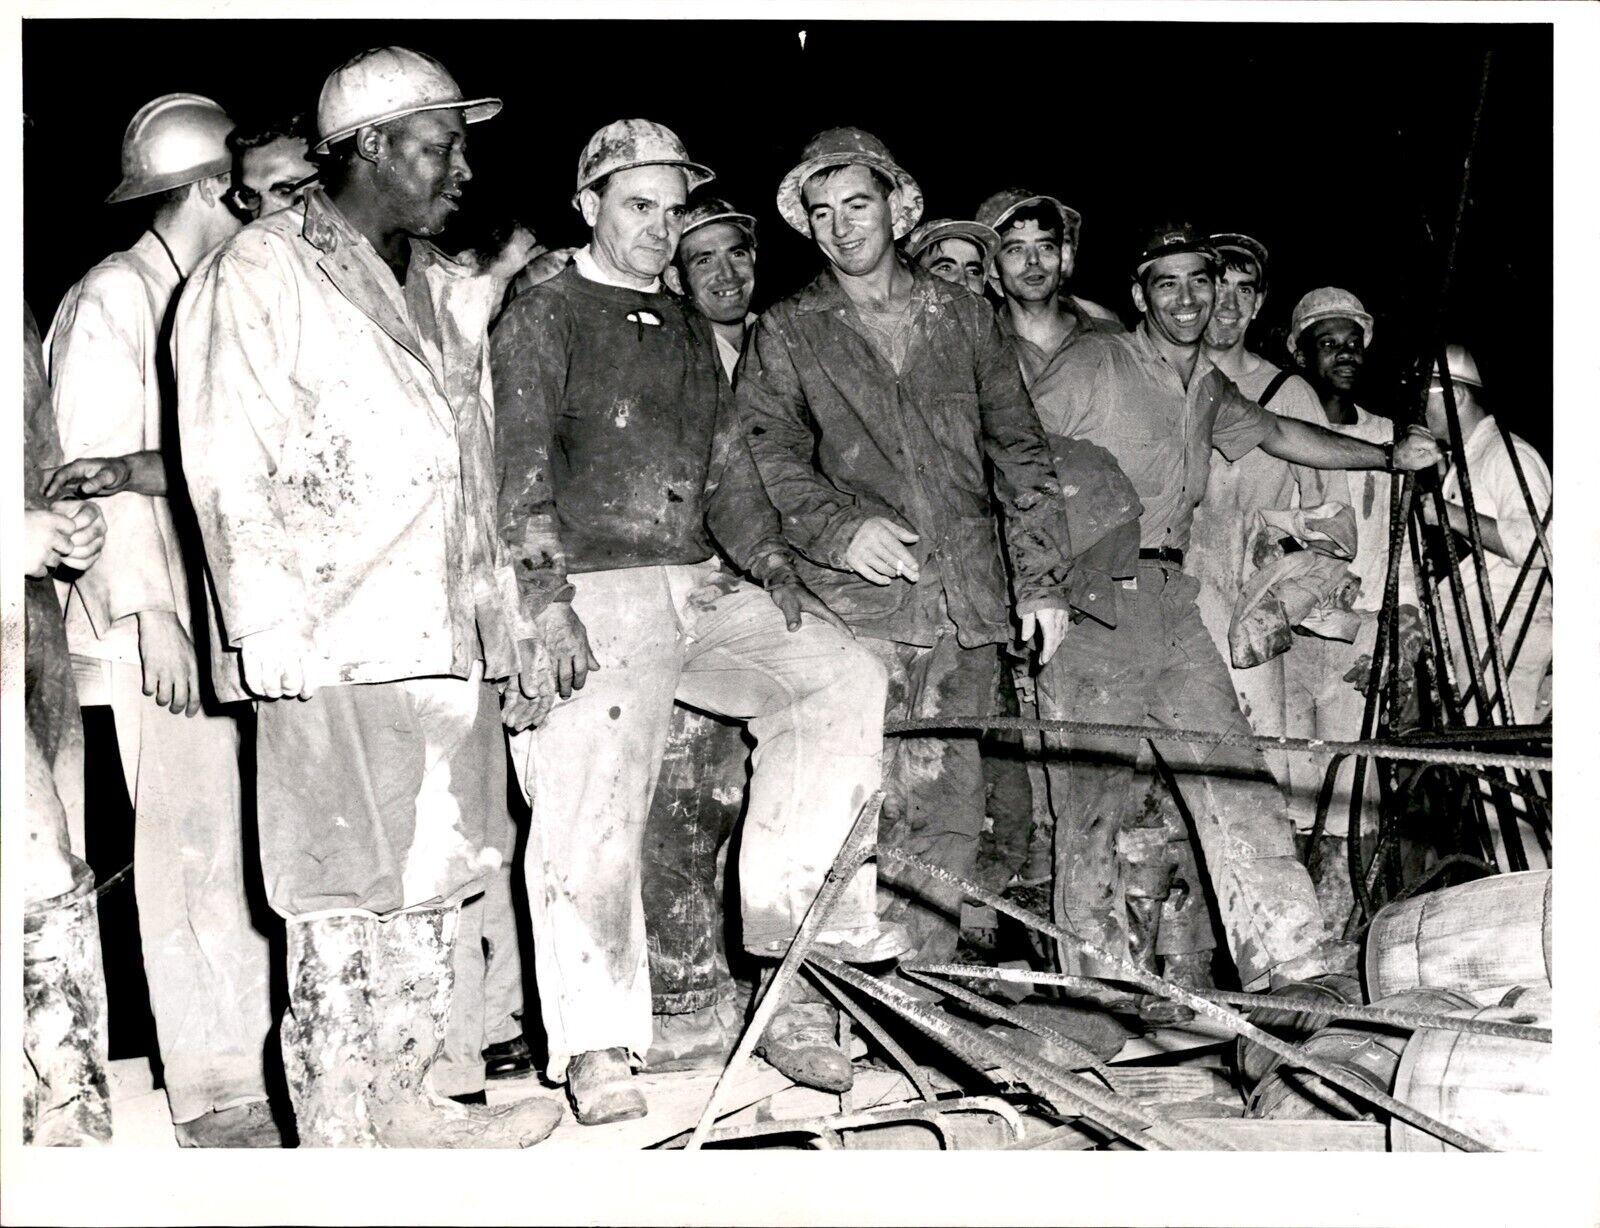 LG985 1960 Original Photo WORKERS LEAVE NEW BOSTON TUNNEL SANDHOGS MUDDY WORKERS